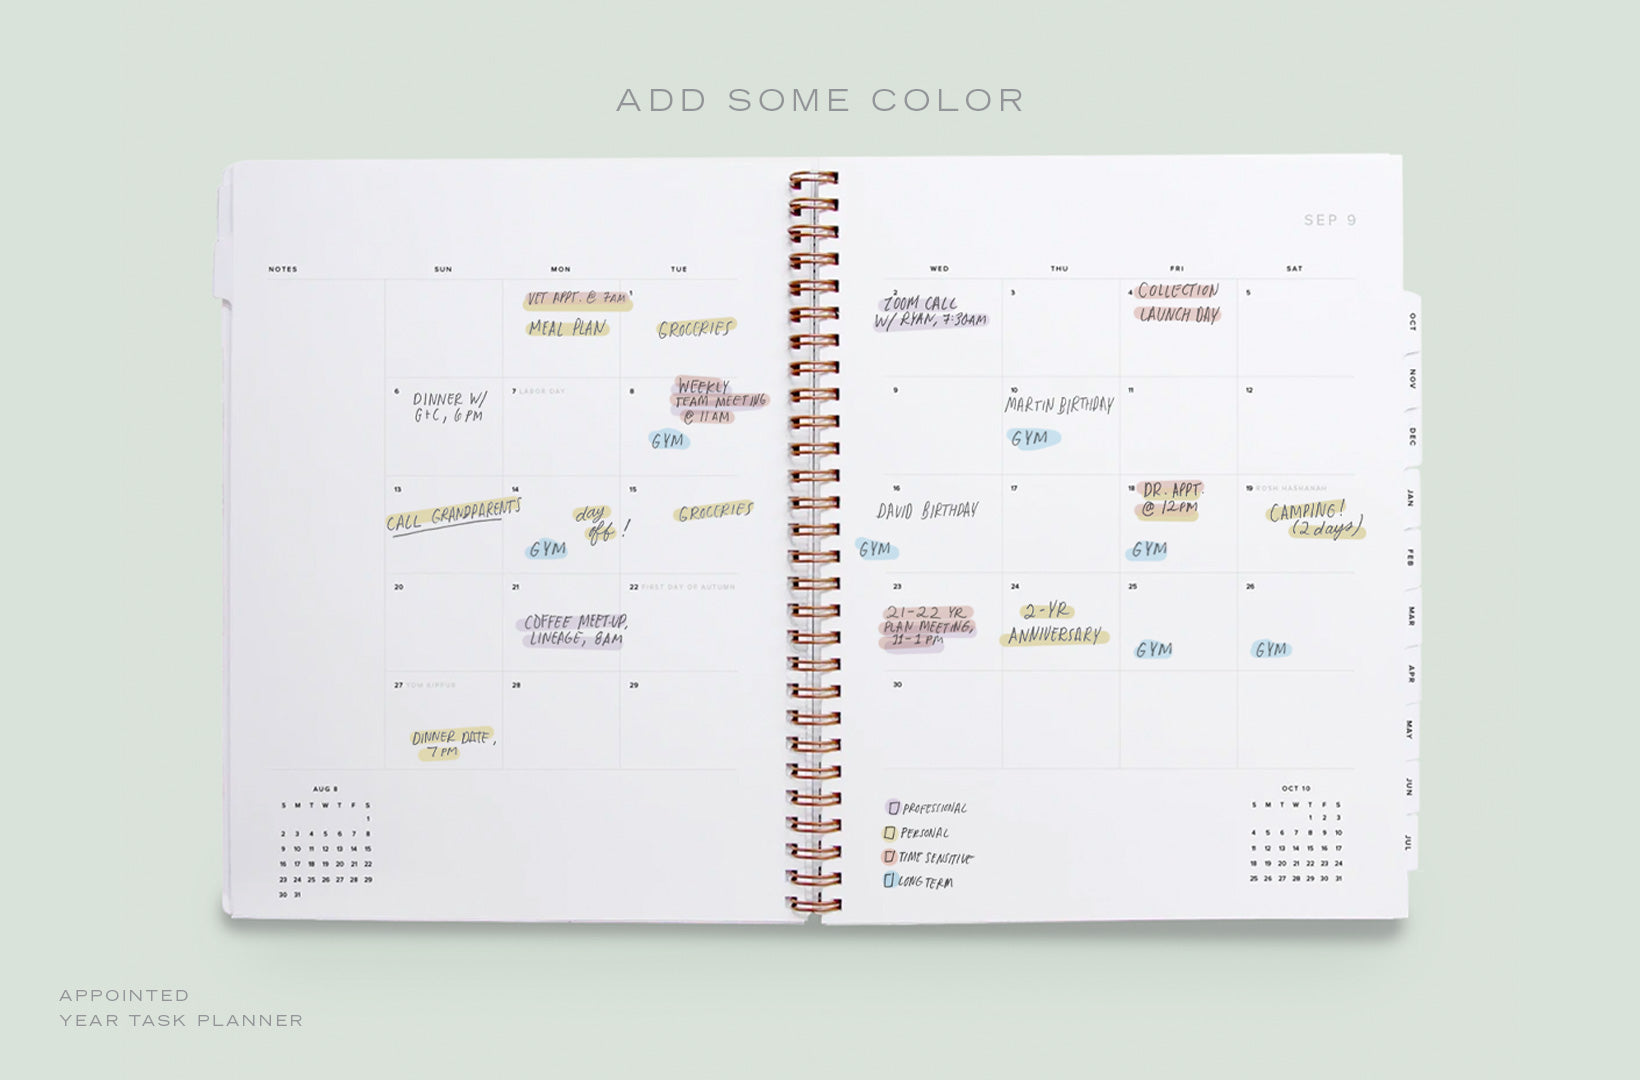 A Year Task Planner lies open to the monthly view, with appointments and to-dos color coded with highlighters by type